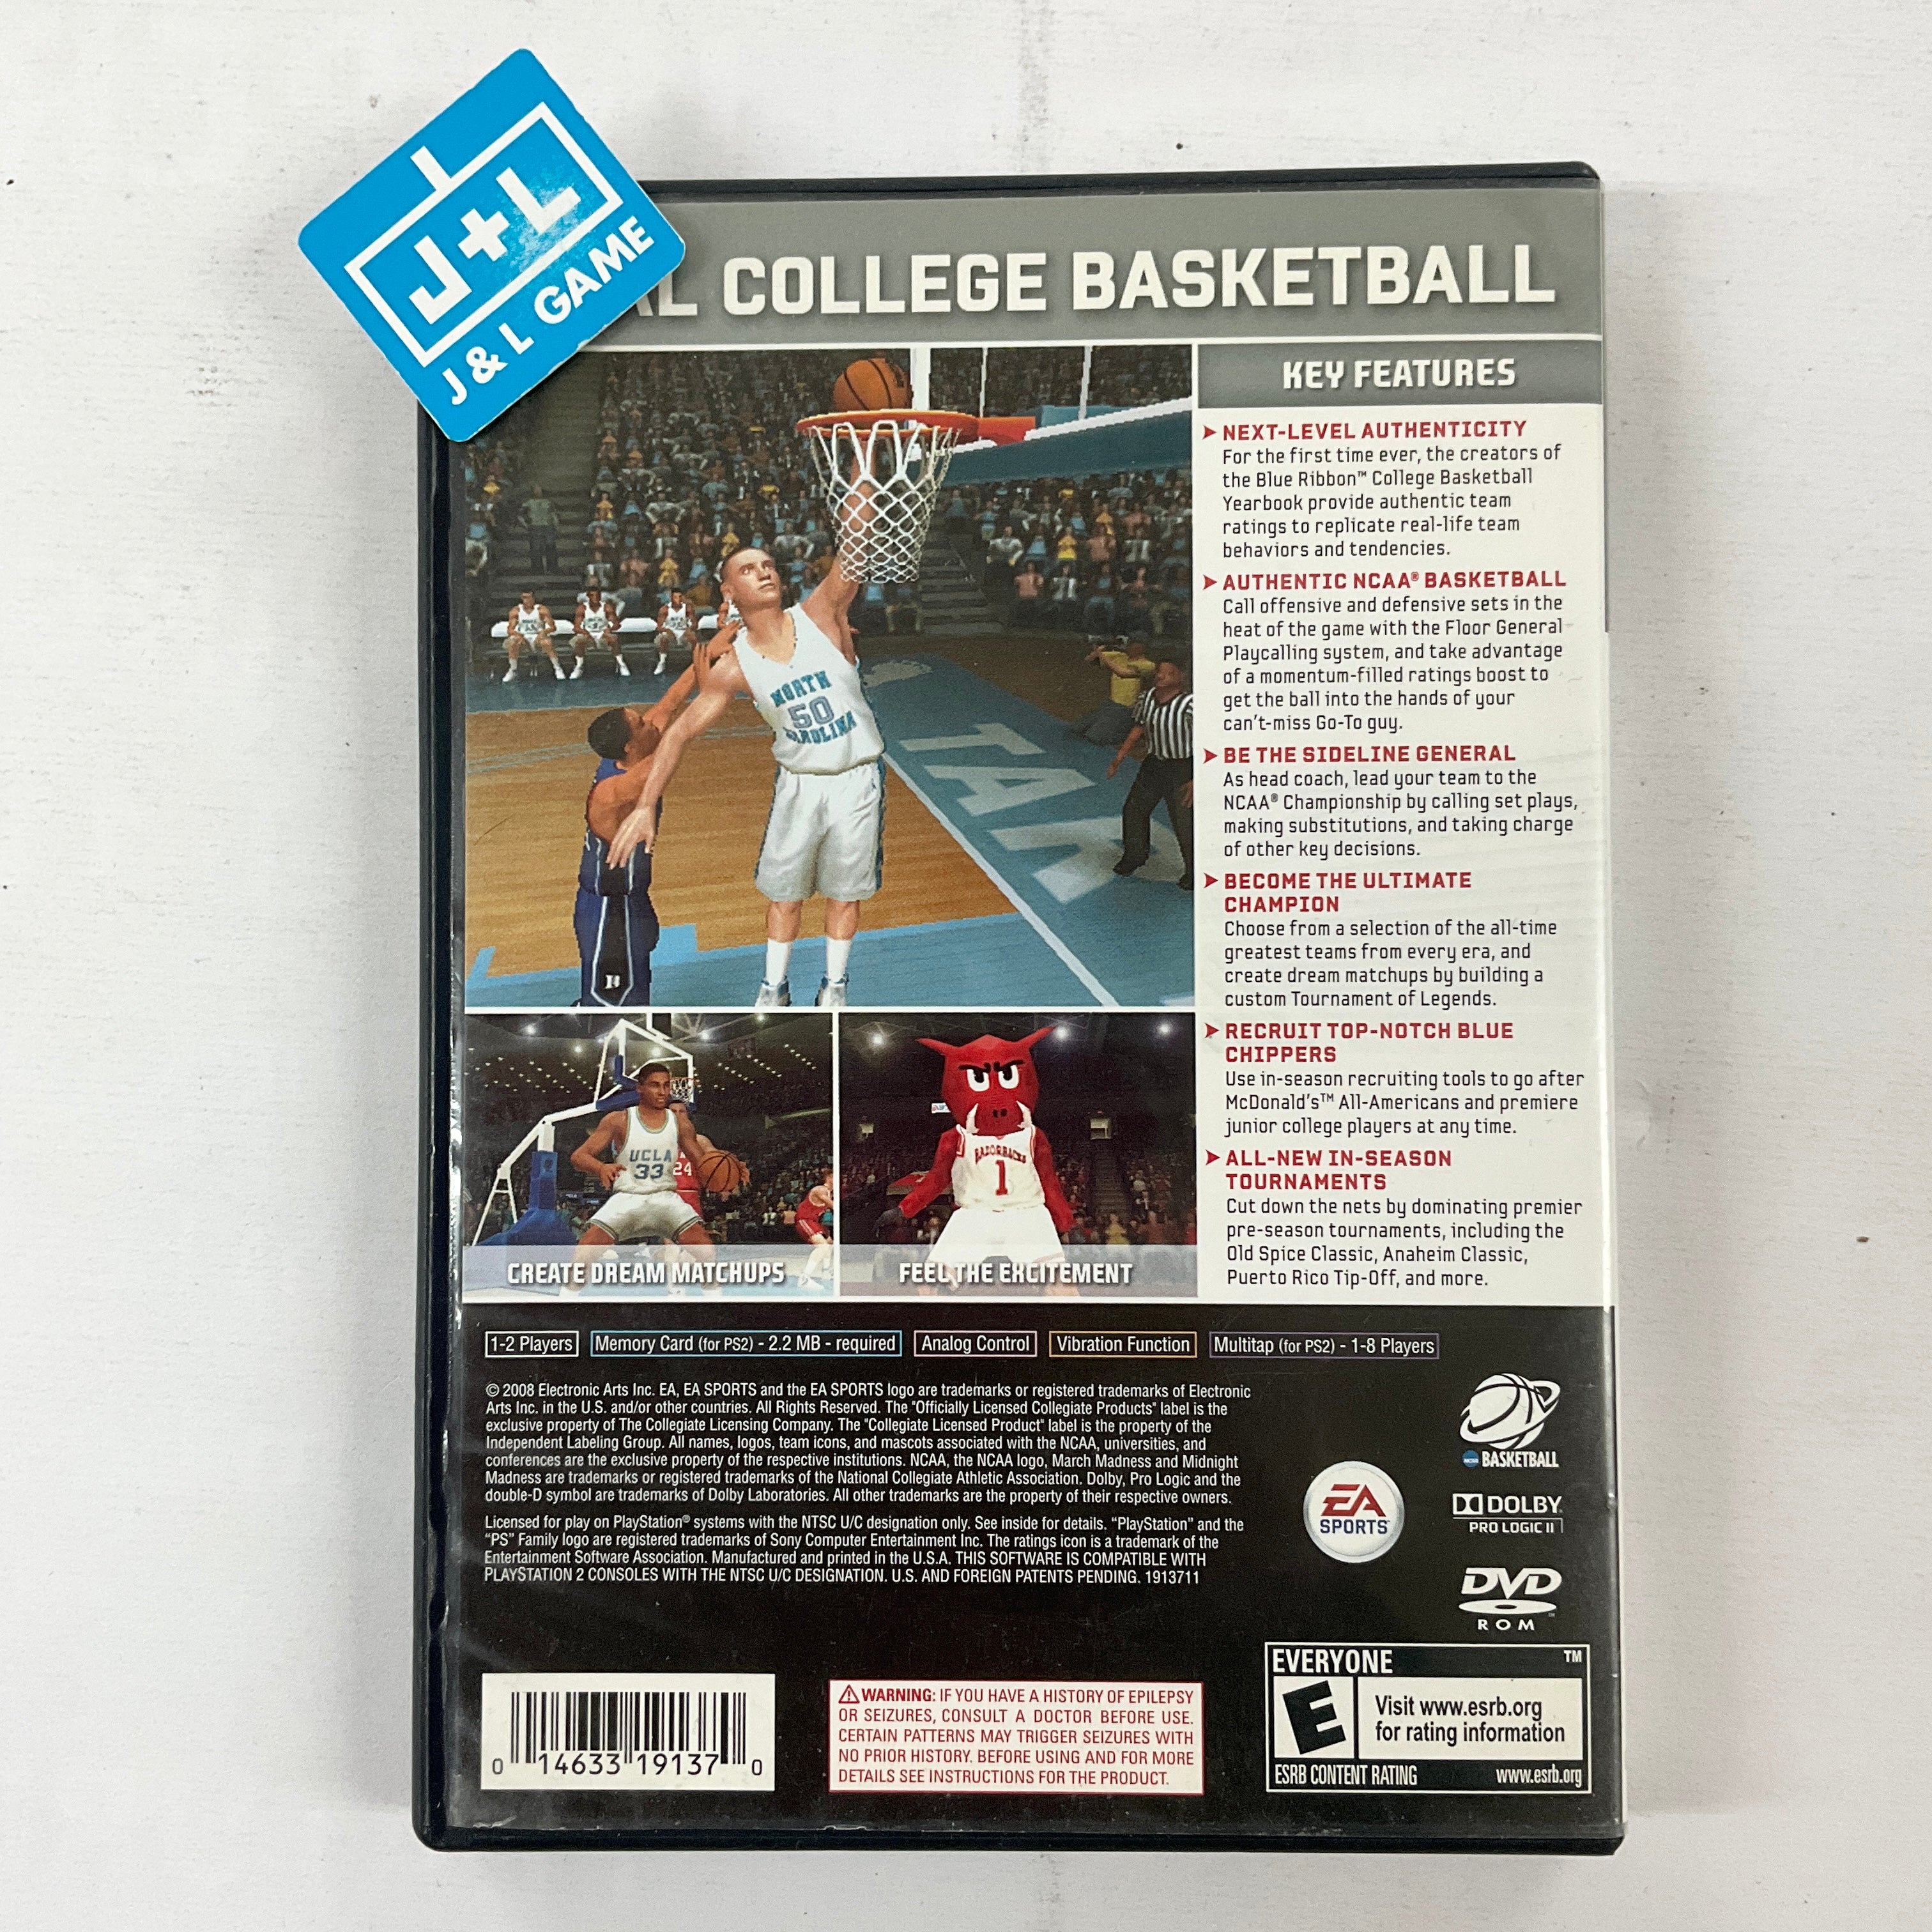 NCAA Basketball 09 - (PS2) PlayStation 2 [Pre-Owned] Video Games Electronic Arts   